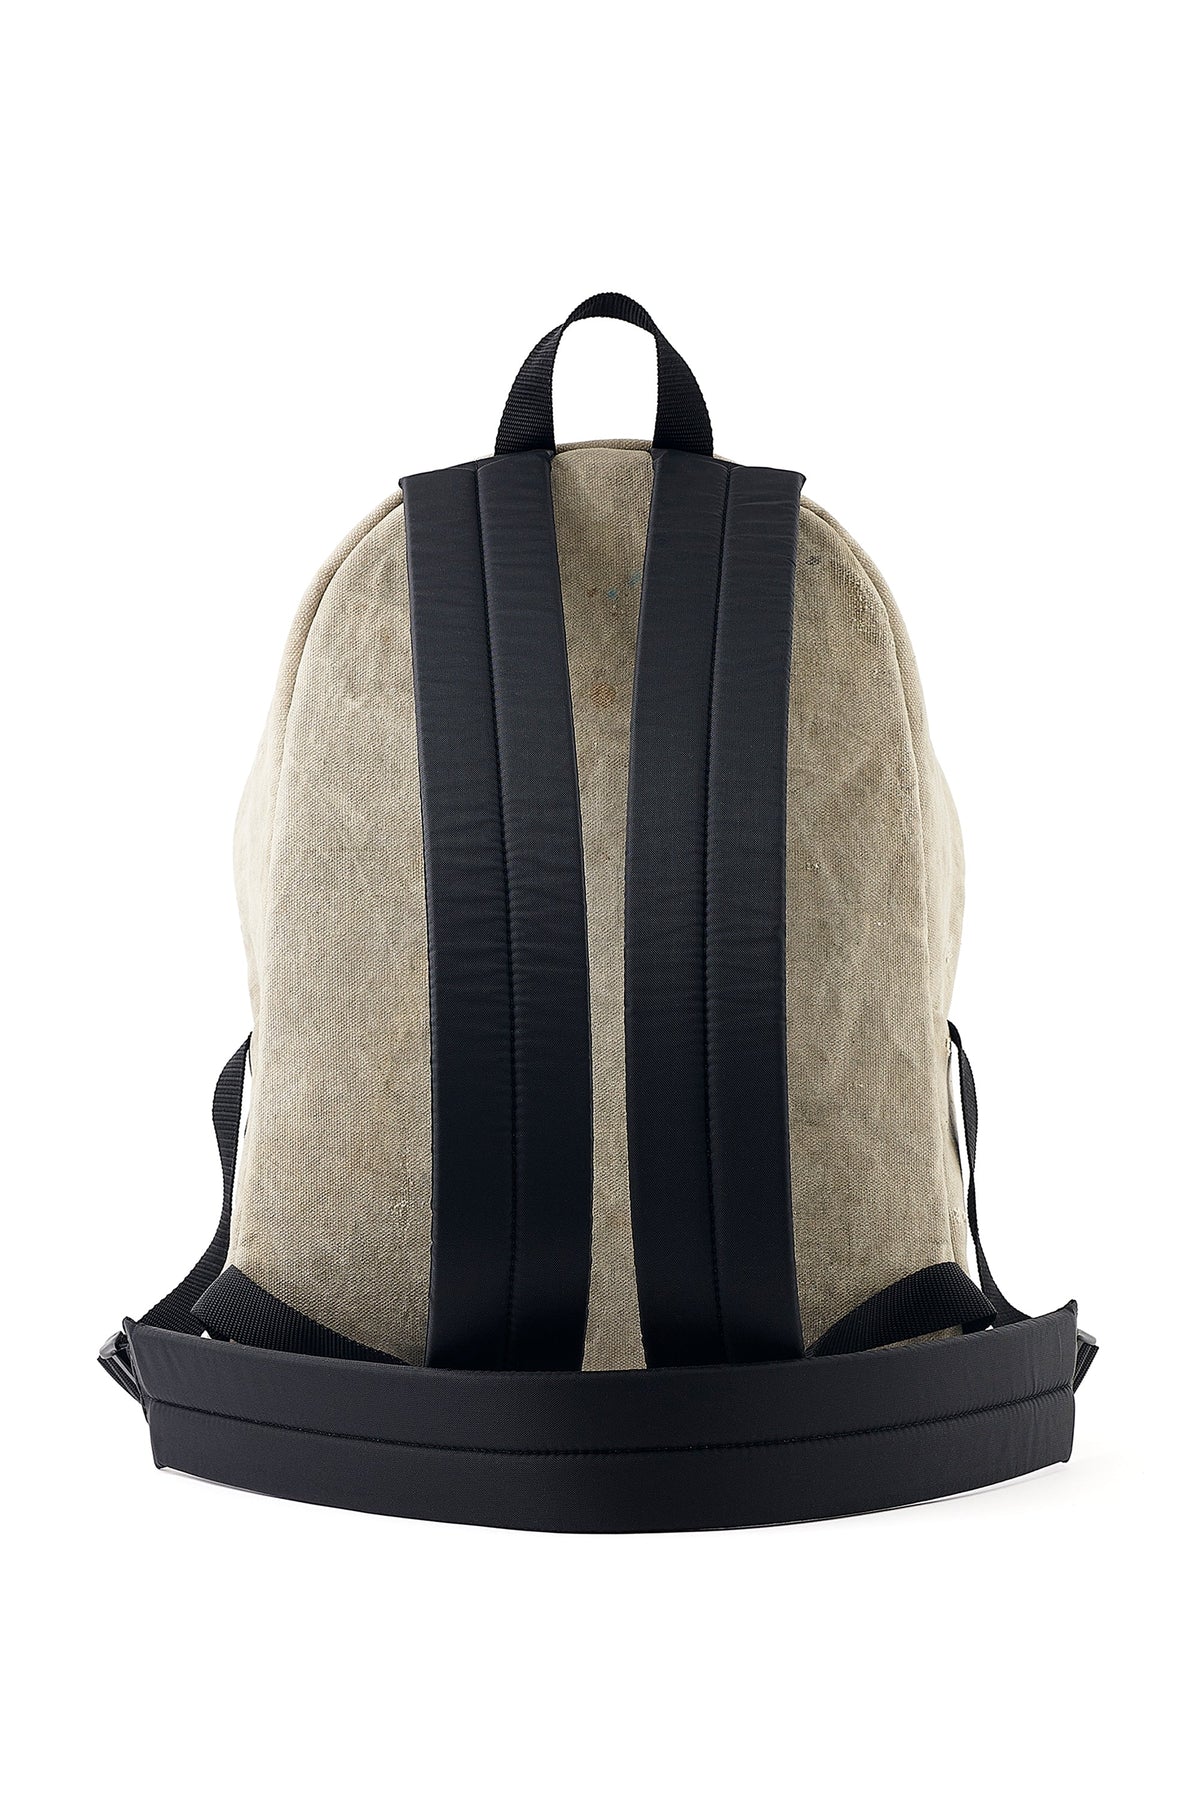 READYMADE BACKPACK / WHT